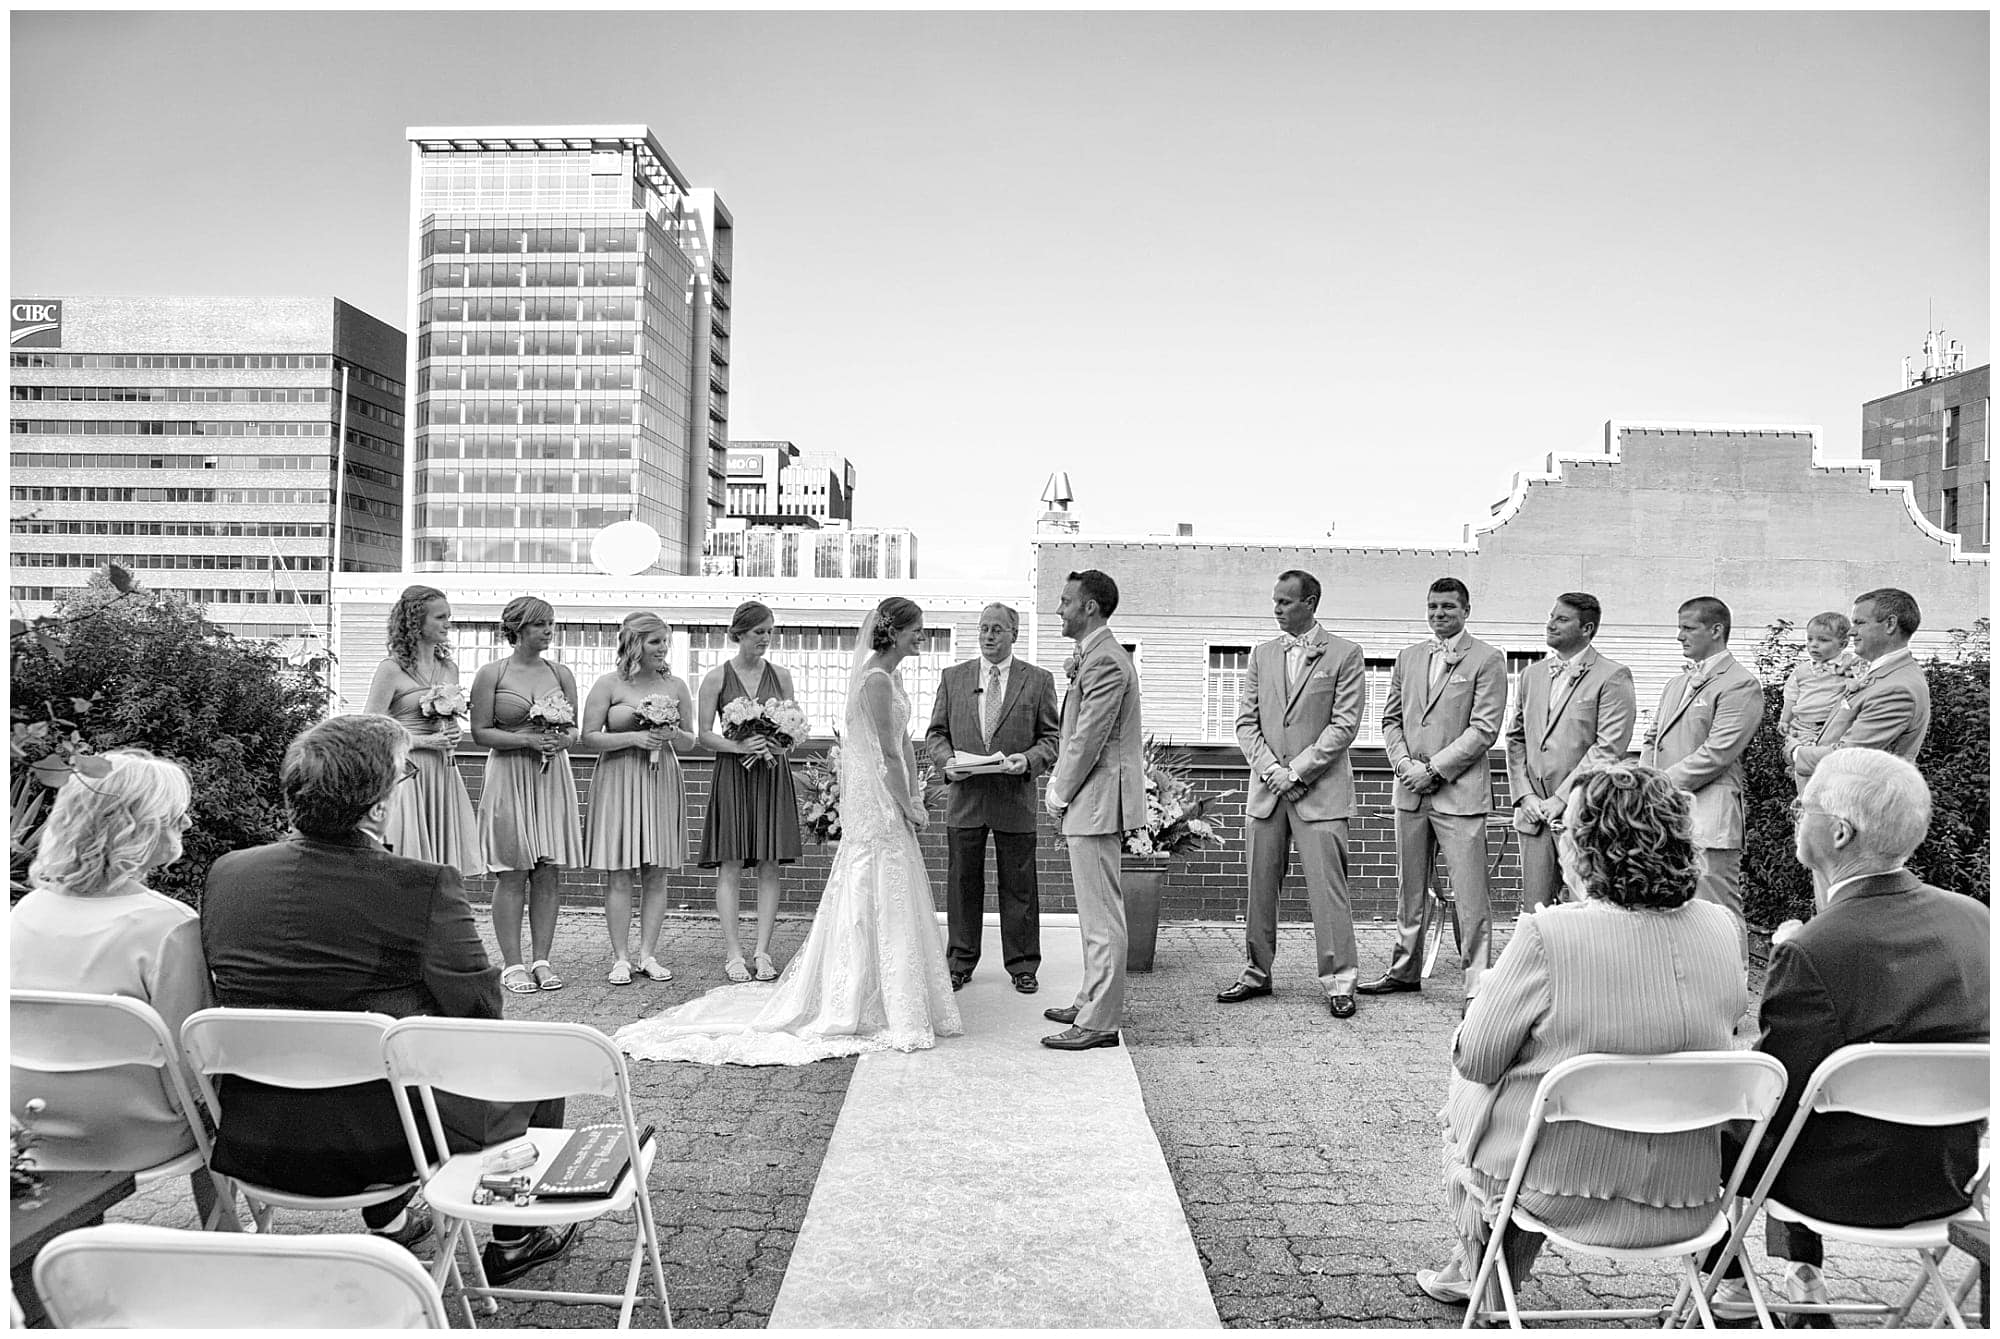 The bride and groom's wedding ceremony on the balcony at the Prince George Hotel in Halifax.